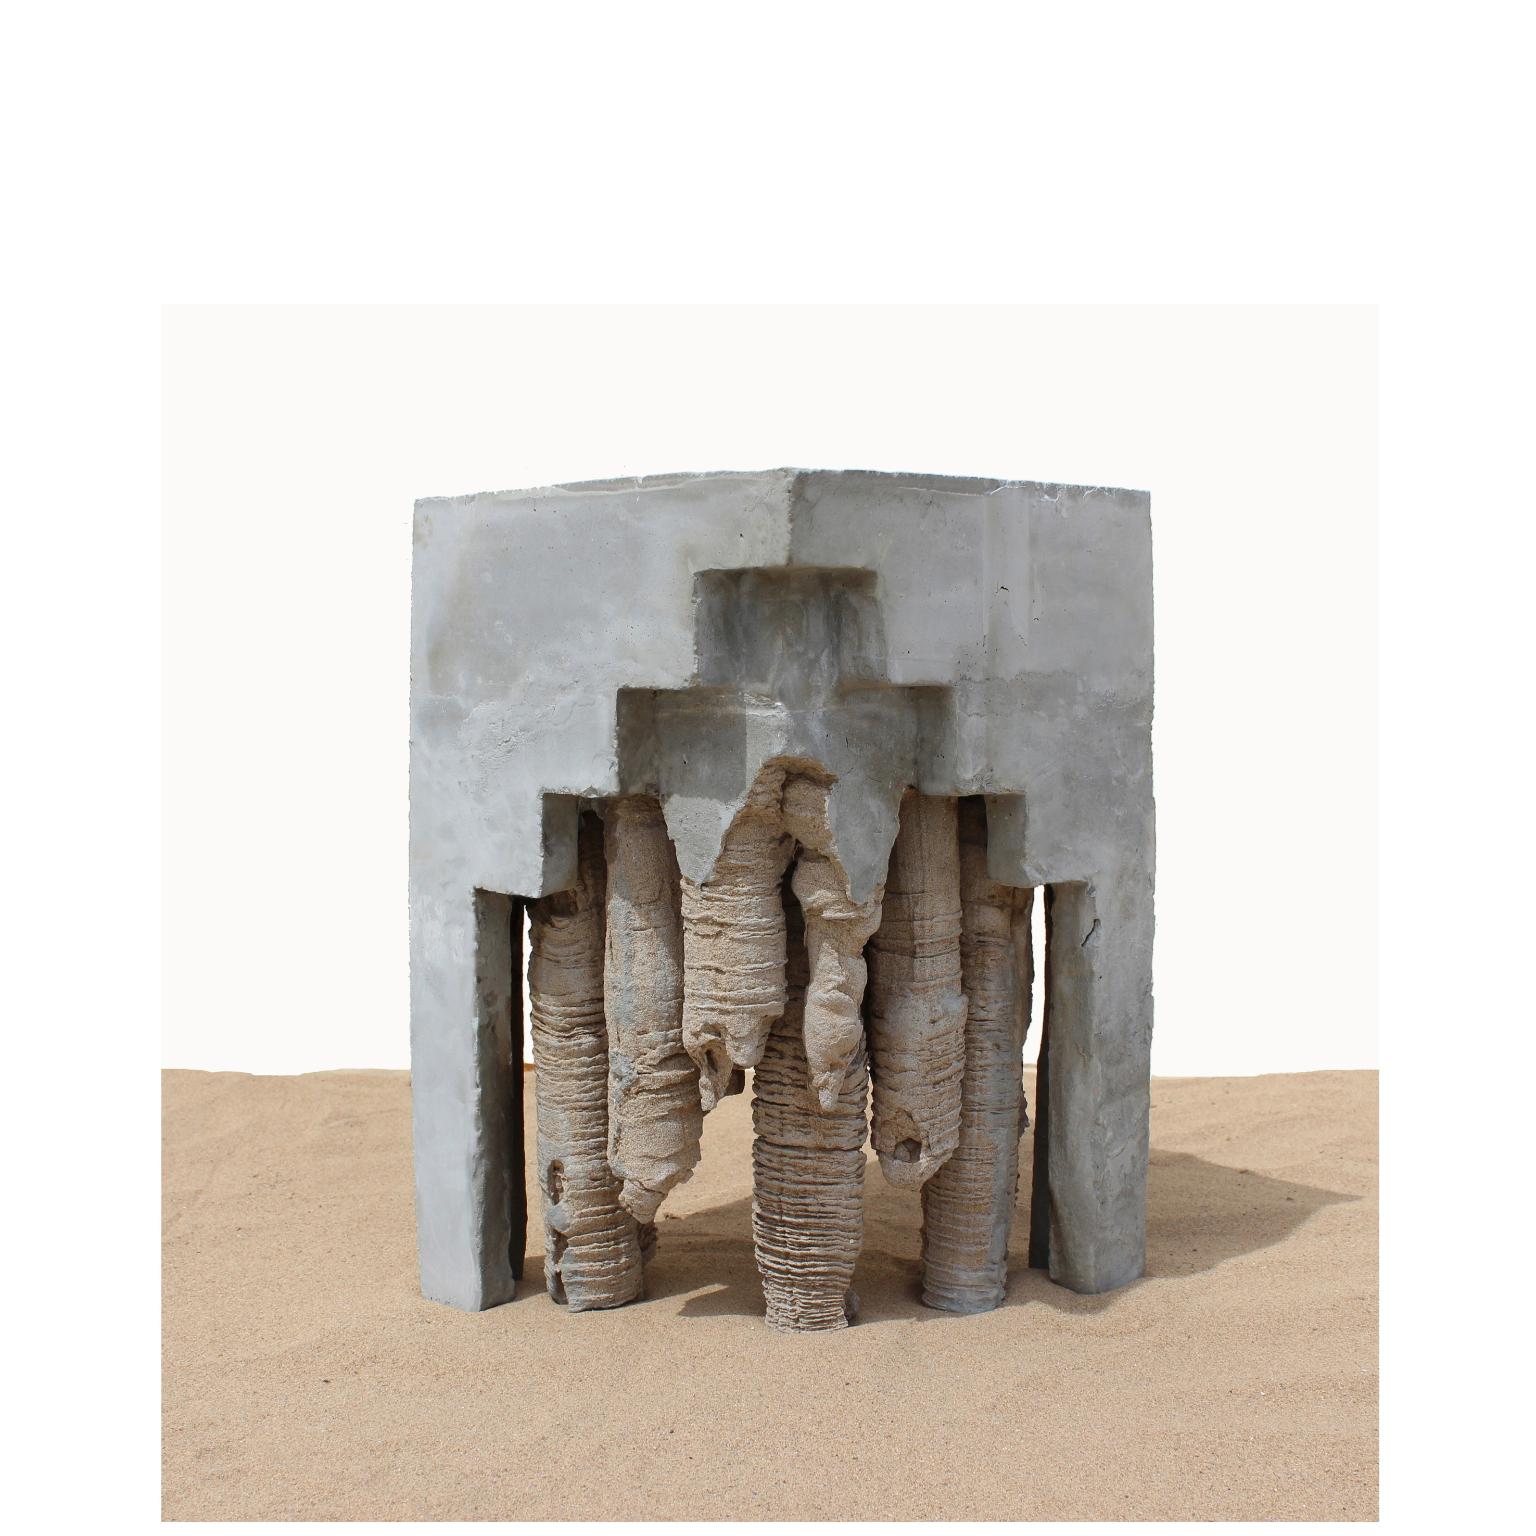 Geomorphic vase by Christian Zahr
Dimensions: W 25 x D 25 x H 50 cm
Materials: Cement- Sand- Water- Time.

Each piece is handmade.

The “Muqarnas” side table, as it’s name indicates, replicates the muqarnas, a powerful sculptural element in